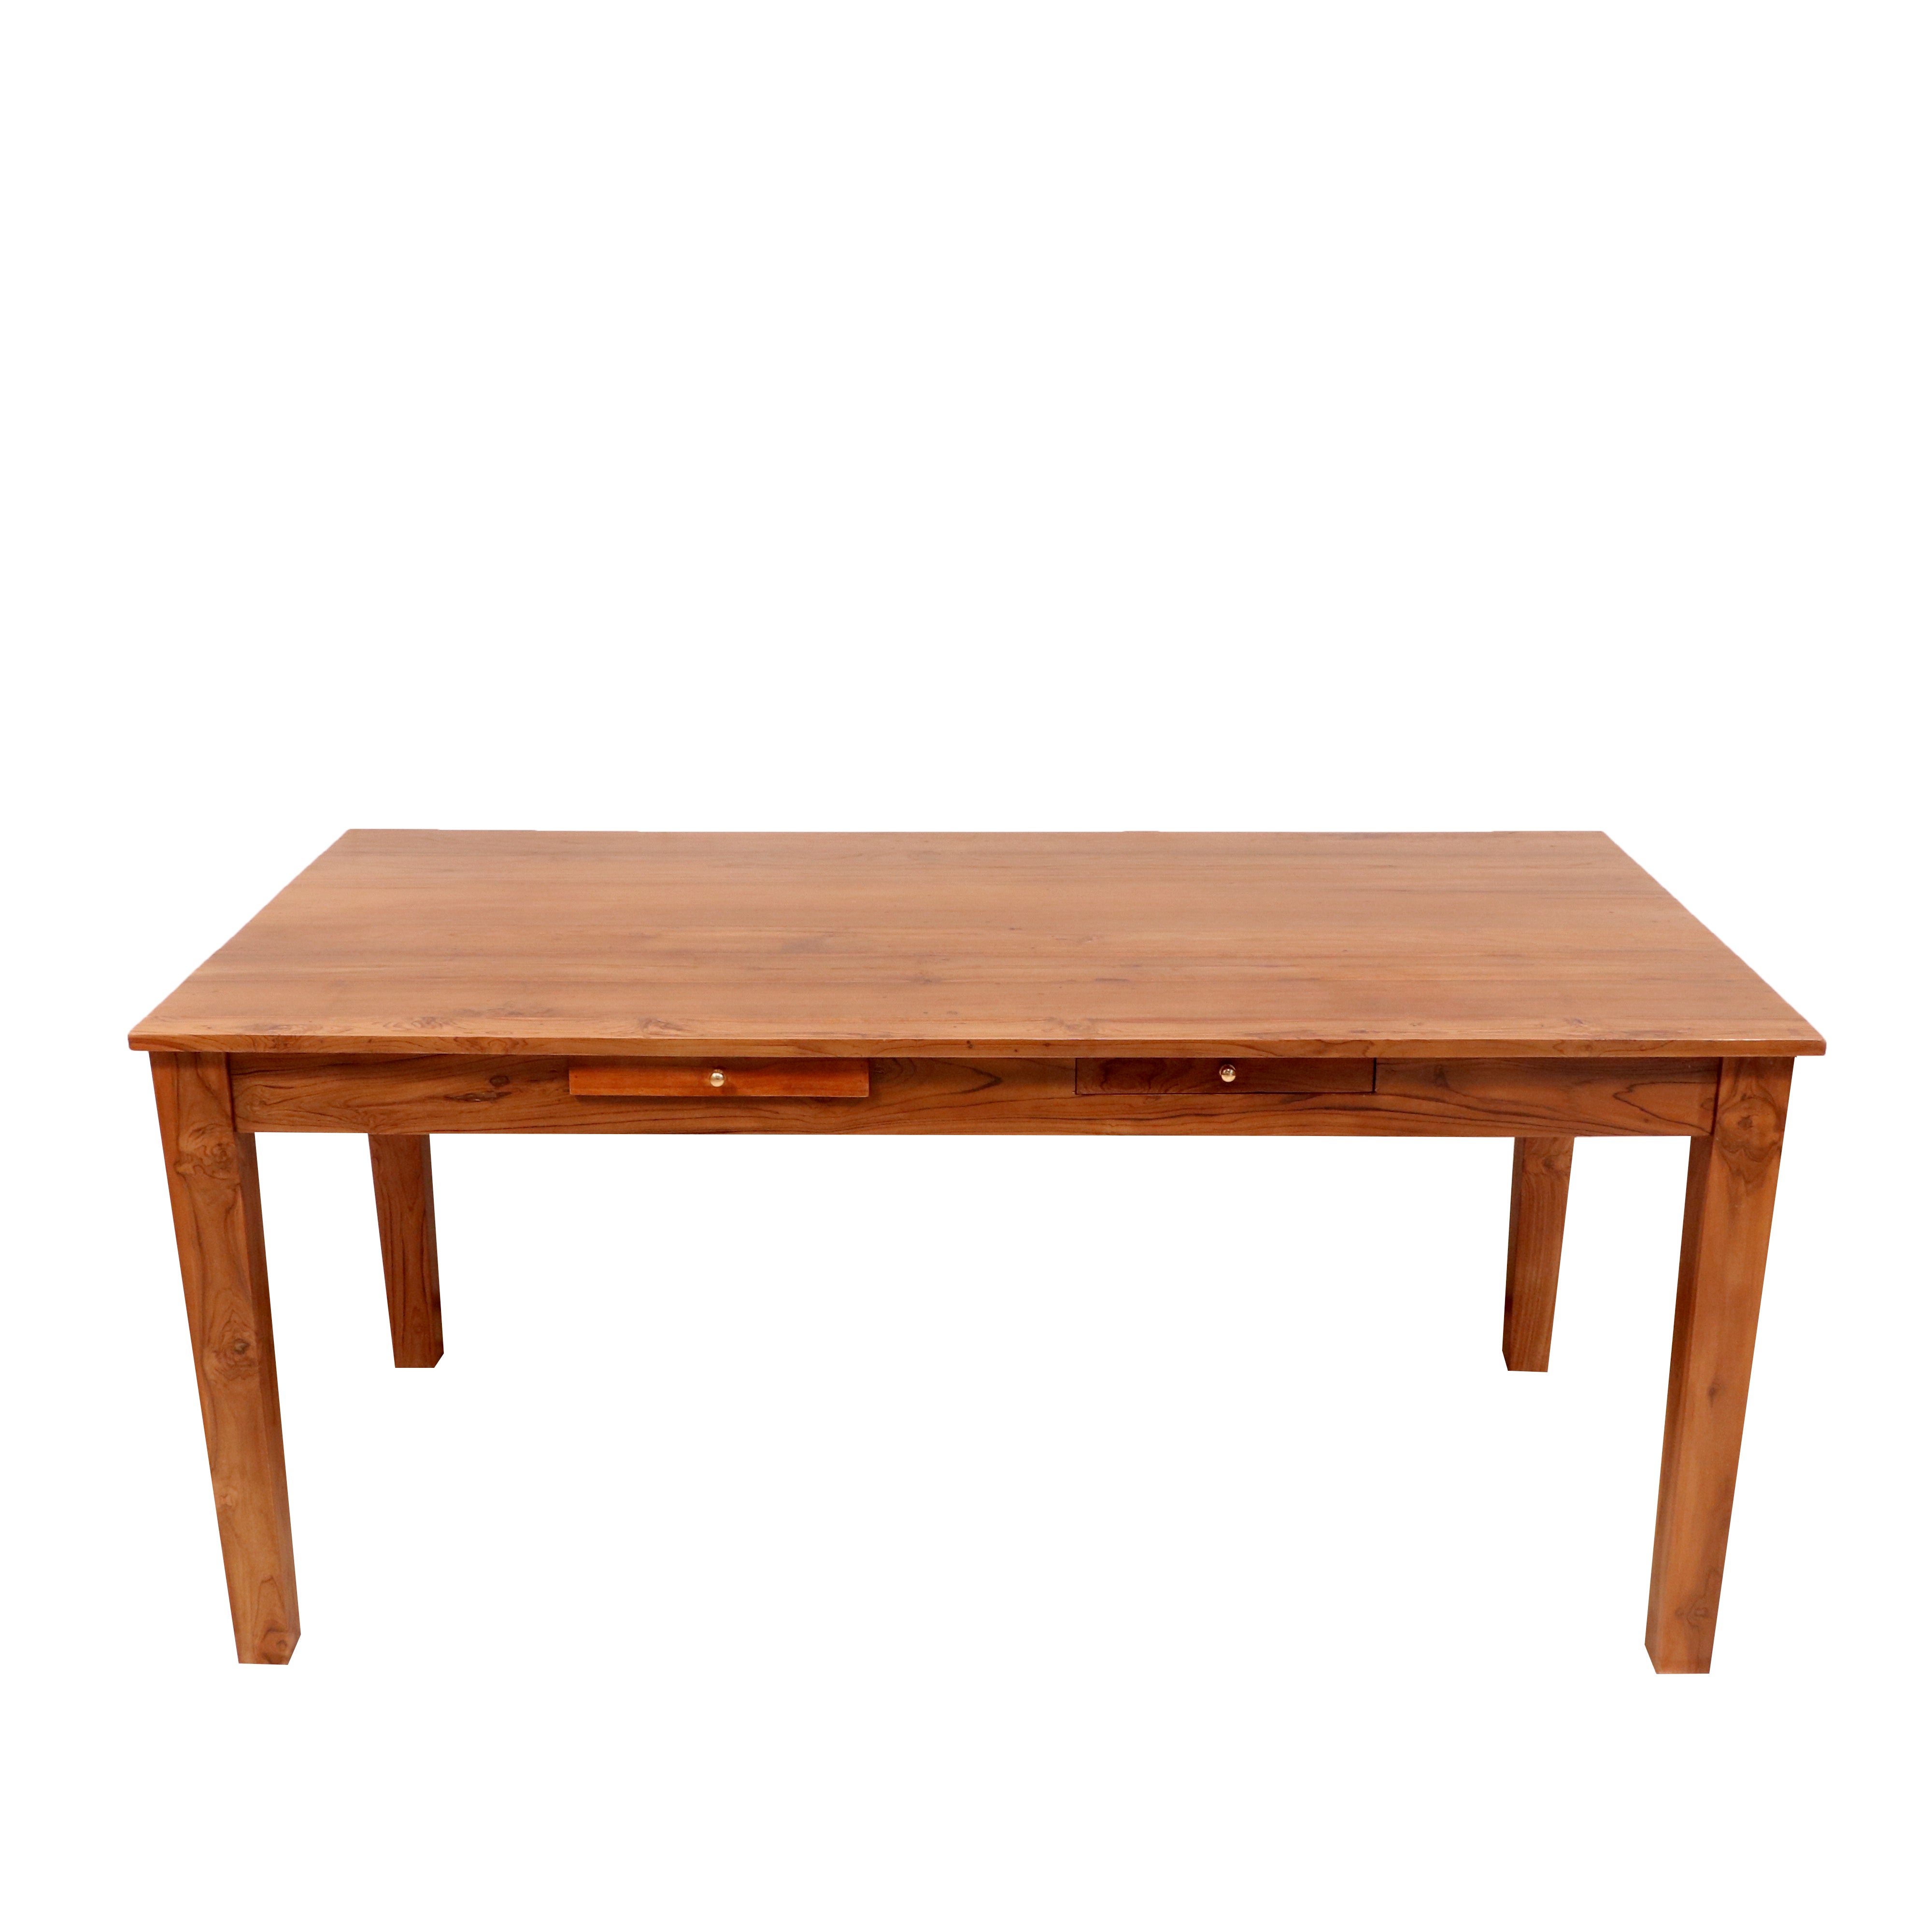 2 Drawer Teak wood 6 Seater dining table Dining Table